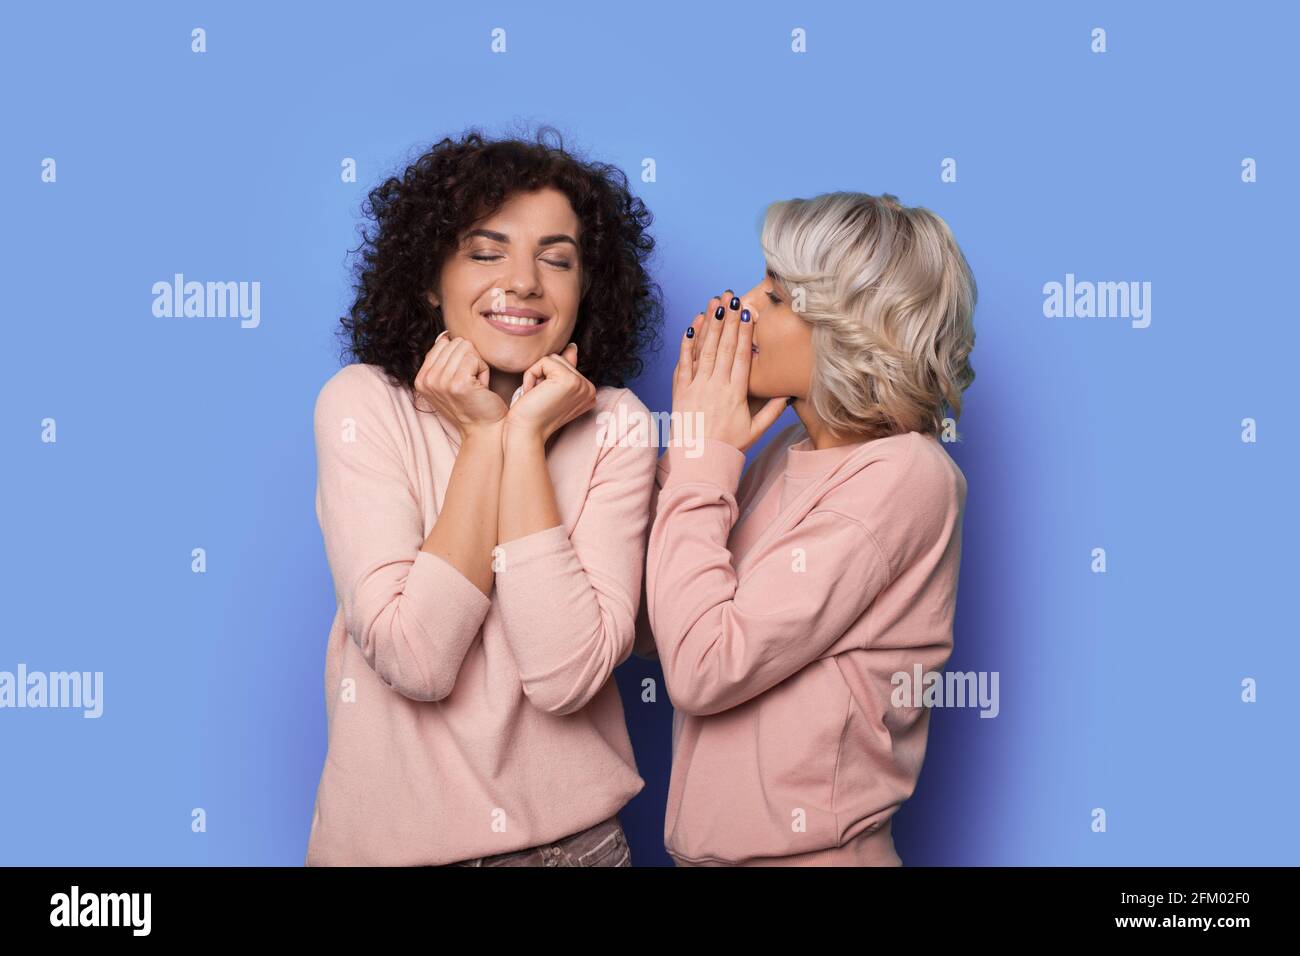 Blonde curly woman is whispering something to her brunette sister smiling on a blue studio wall Stock Photo